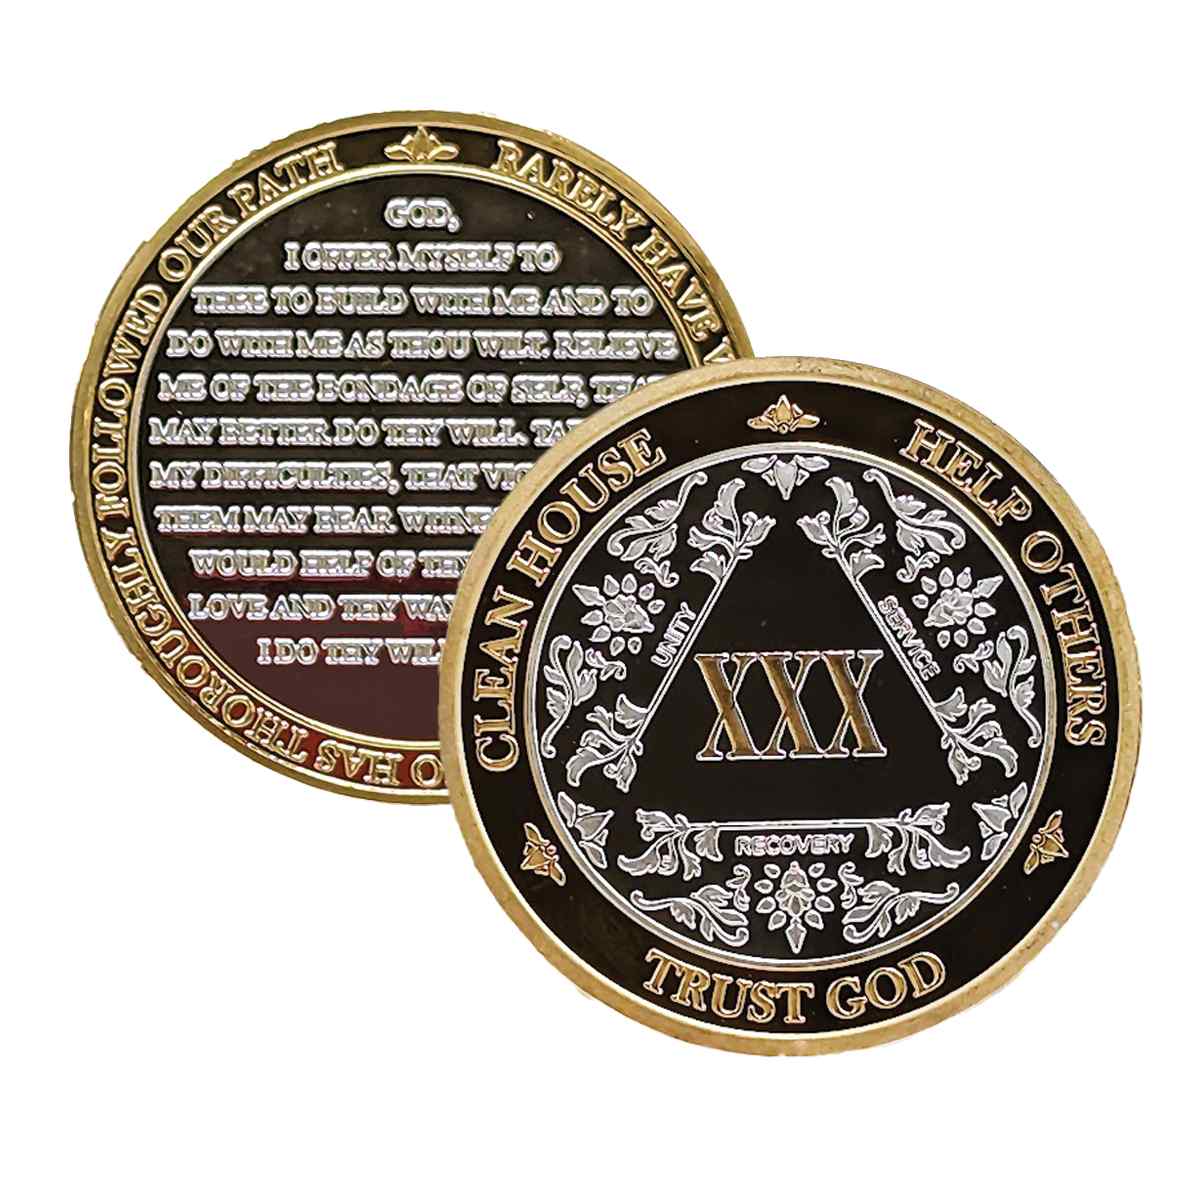 (3-PACK) Pick Any 3 years...Silver & Gold Medallion... Pick Your 3 Years